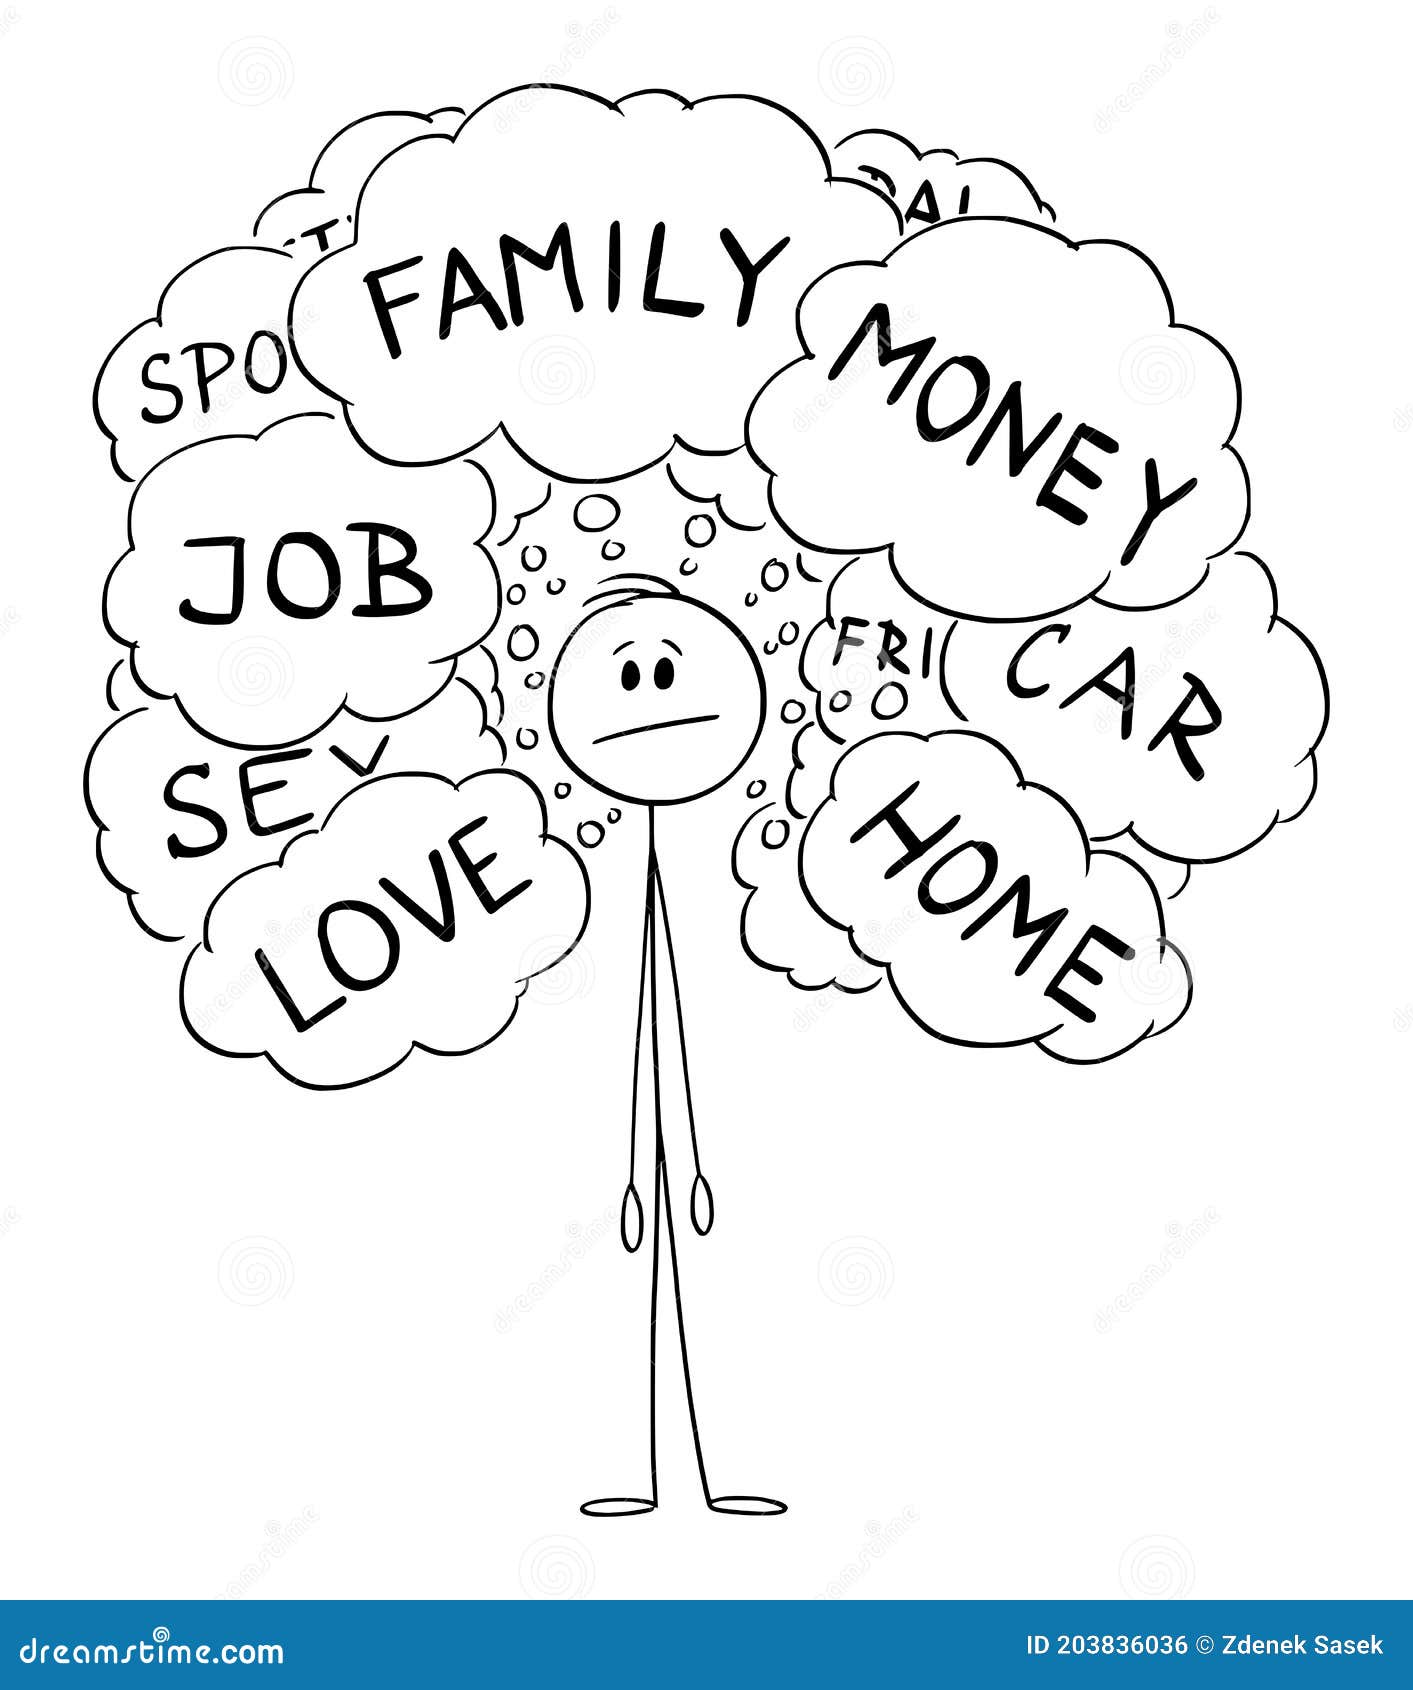 Vector Cartoon Illustration of Man Thinking about Family,Money,Sex,Home,Love, Car, Job and More Problems of His Life Stock Vector image picture